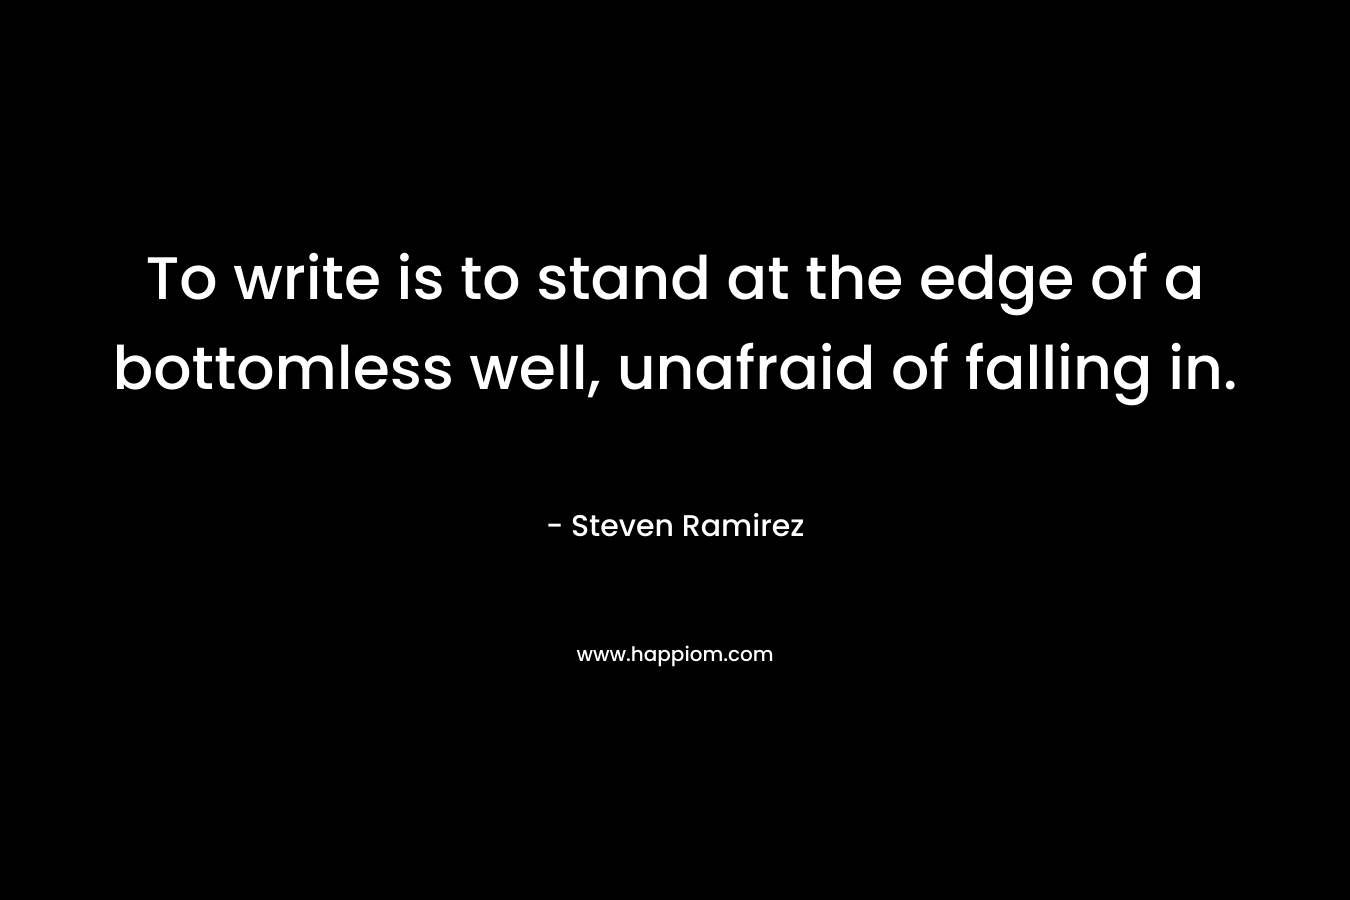 To write is to stand at the edge of a bottomless well, unafraid of falling in. – Steven Ramirez